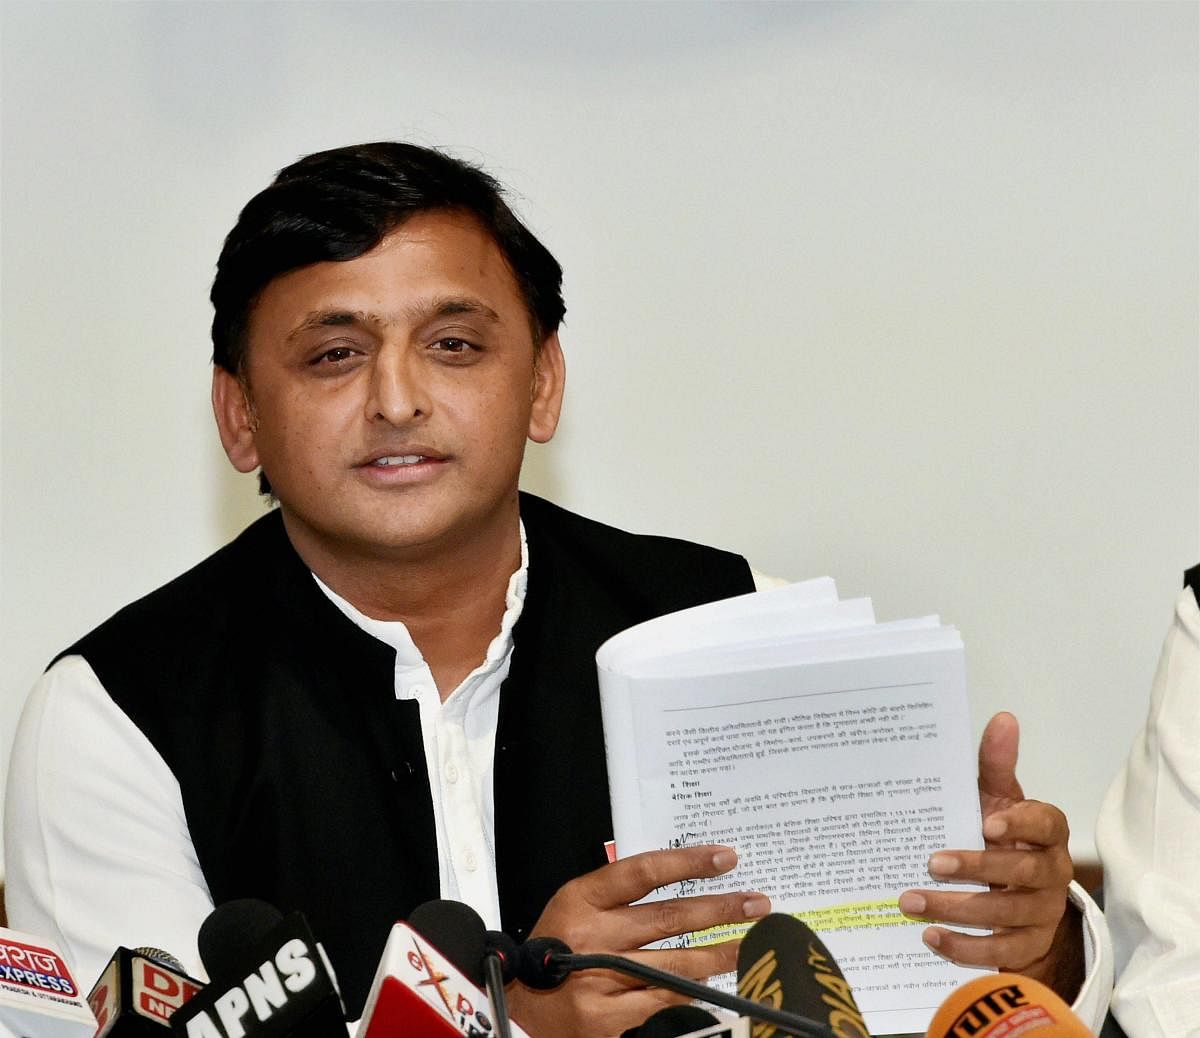 A formal announcement on the alliance between the two Uttar Pradesh-based parties will be made at Saturday's joint press conference with BSP, he said. PTI file photo